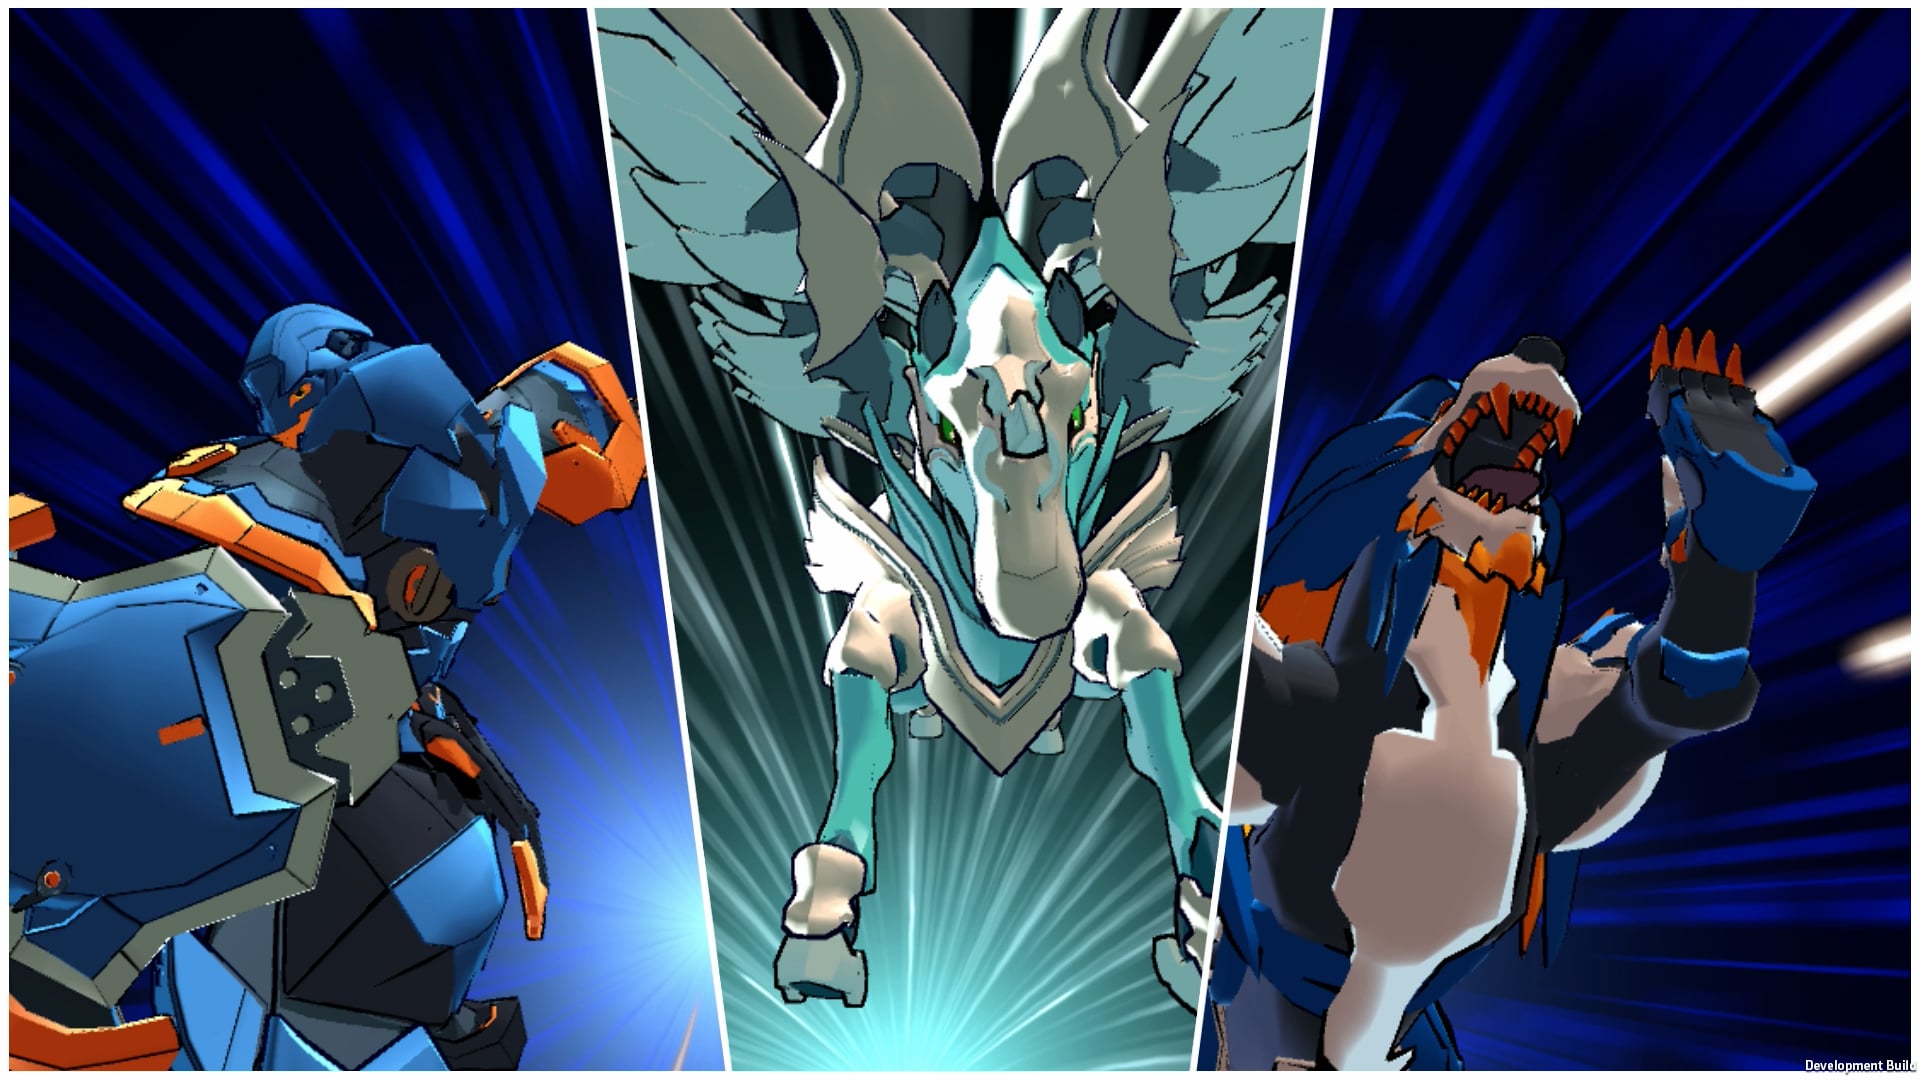 Bakugan: Of Vestroia Will Have Original Story With RPG Elements